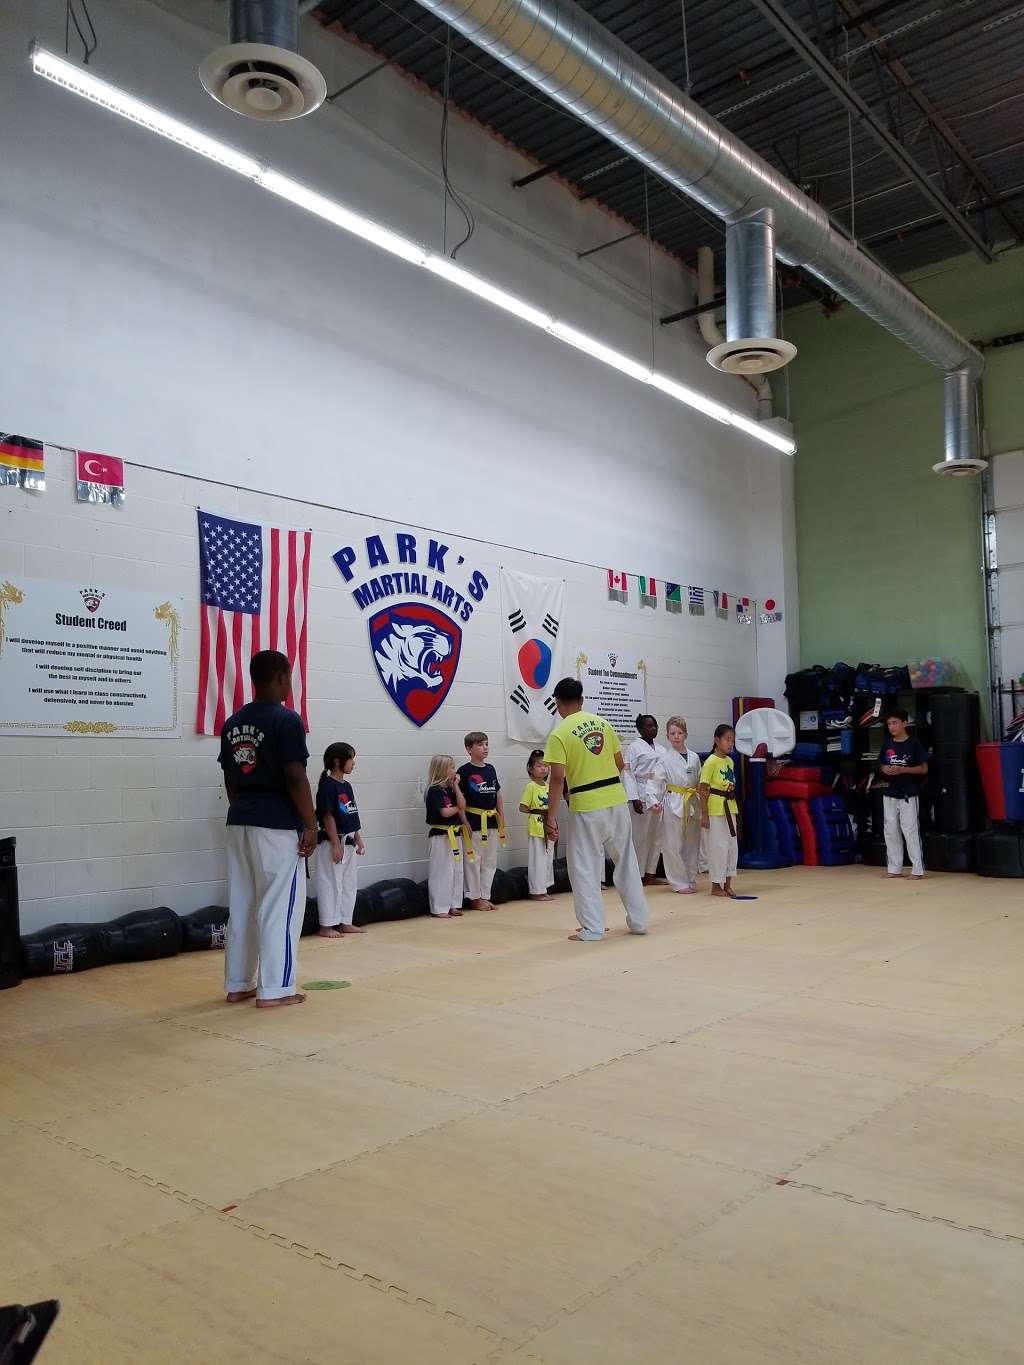 Parks Martial Arts | 8251 Telegraph Rd # A, Odenton, MD 21113, USA | Phone: (410) 305-1100